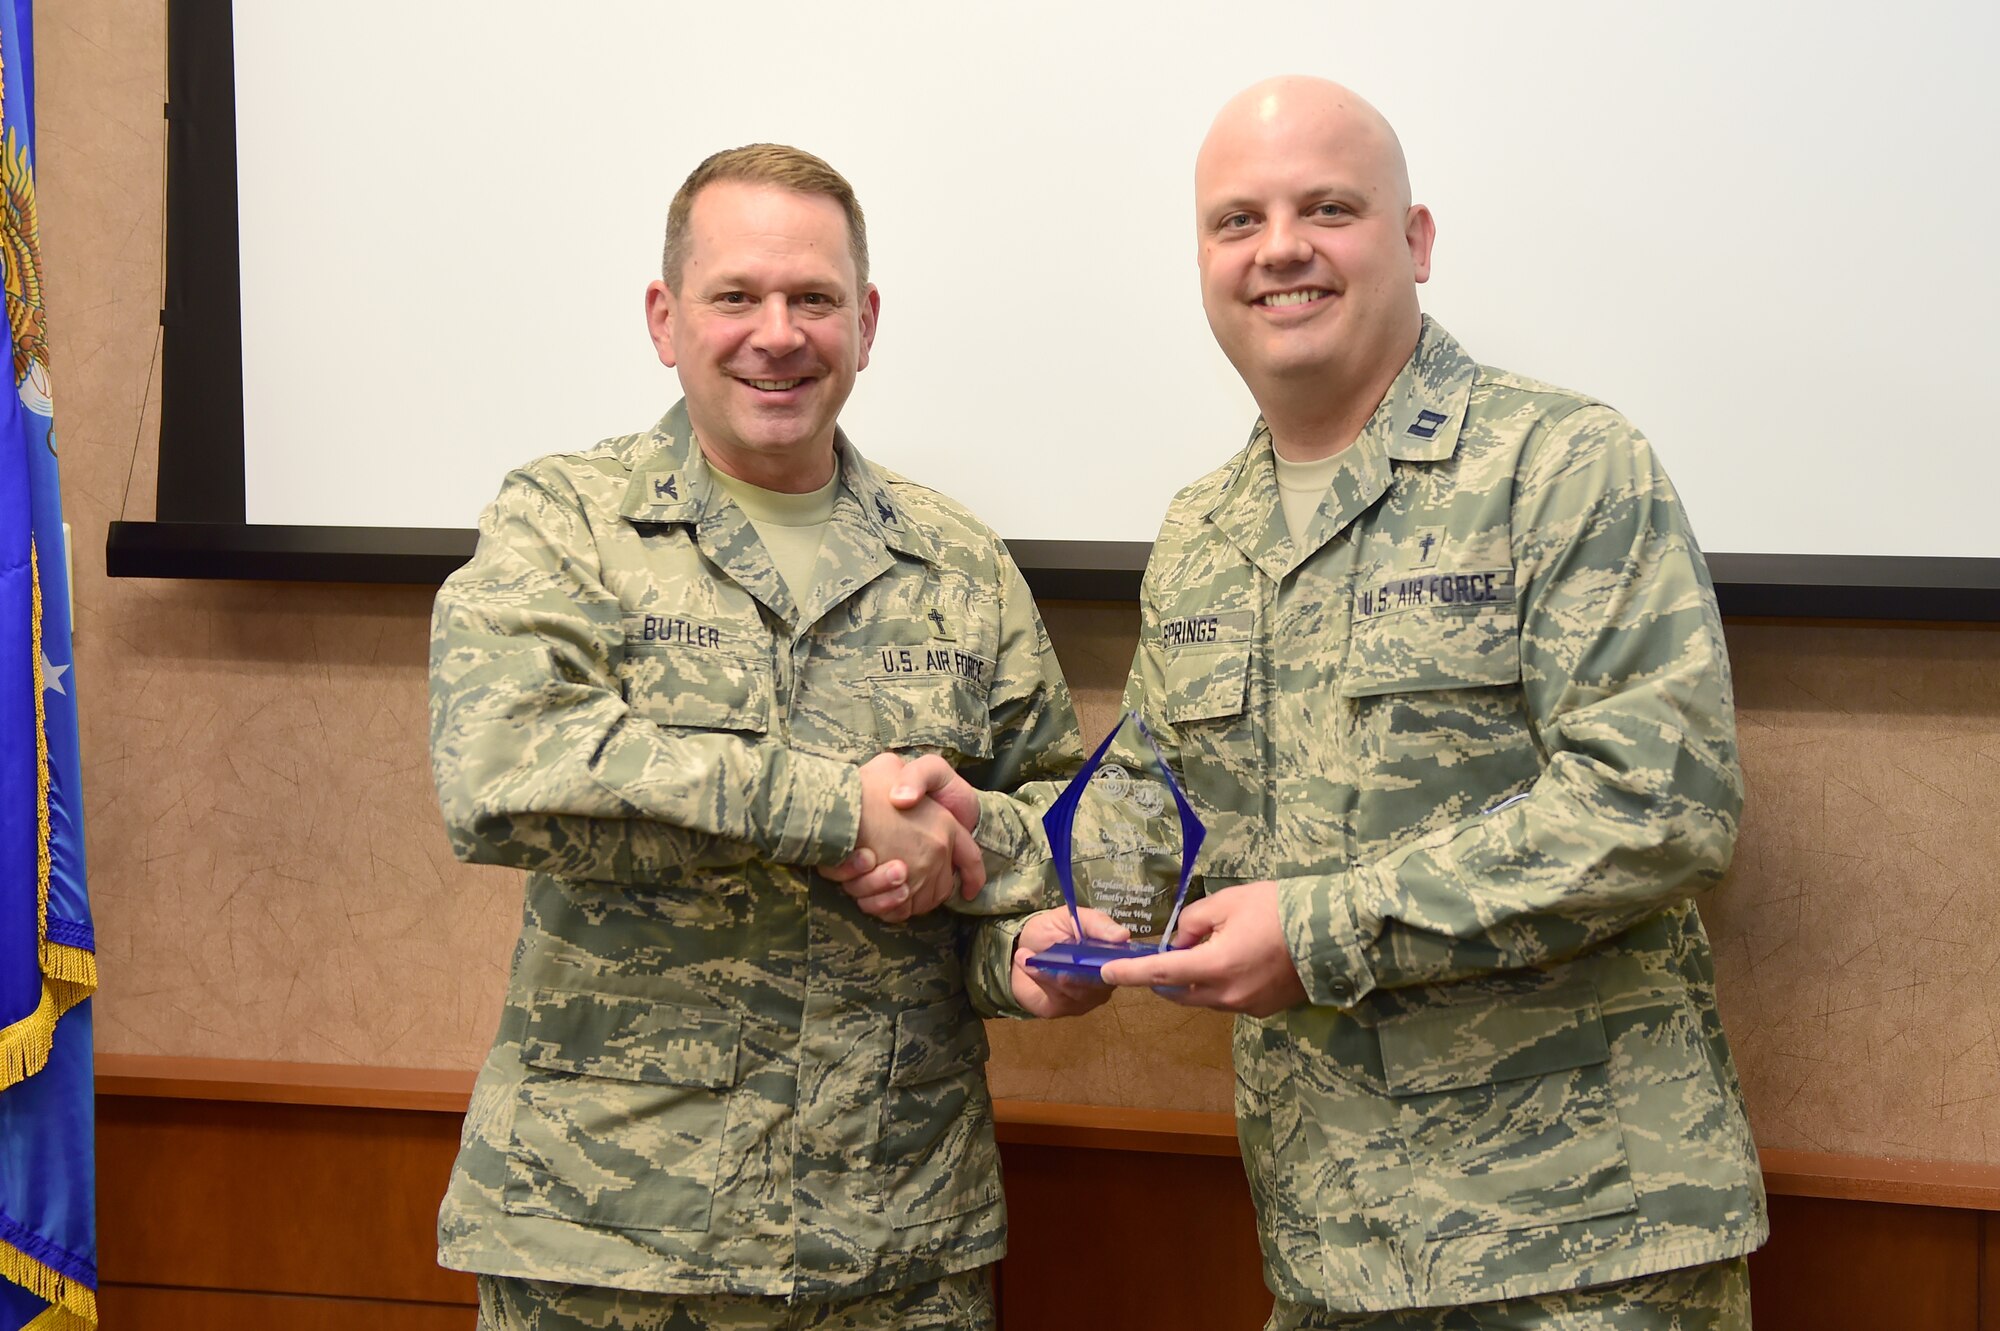 Col. Timothy A. Butler, Air Force Space Command command chaplain, left; awards Capt. Timothy D. Springs, 460th Space Wing chaplain, right; AFSPC Chaplain of the Year May 18, 2015, on Buckley Air Force Base, Colo. With a victory at the AFSPC level, Springs will now compete at the Air Force level. (U.S. Air Force photo by Airman 1st Class Luke W. Nowakowski/Released)